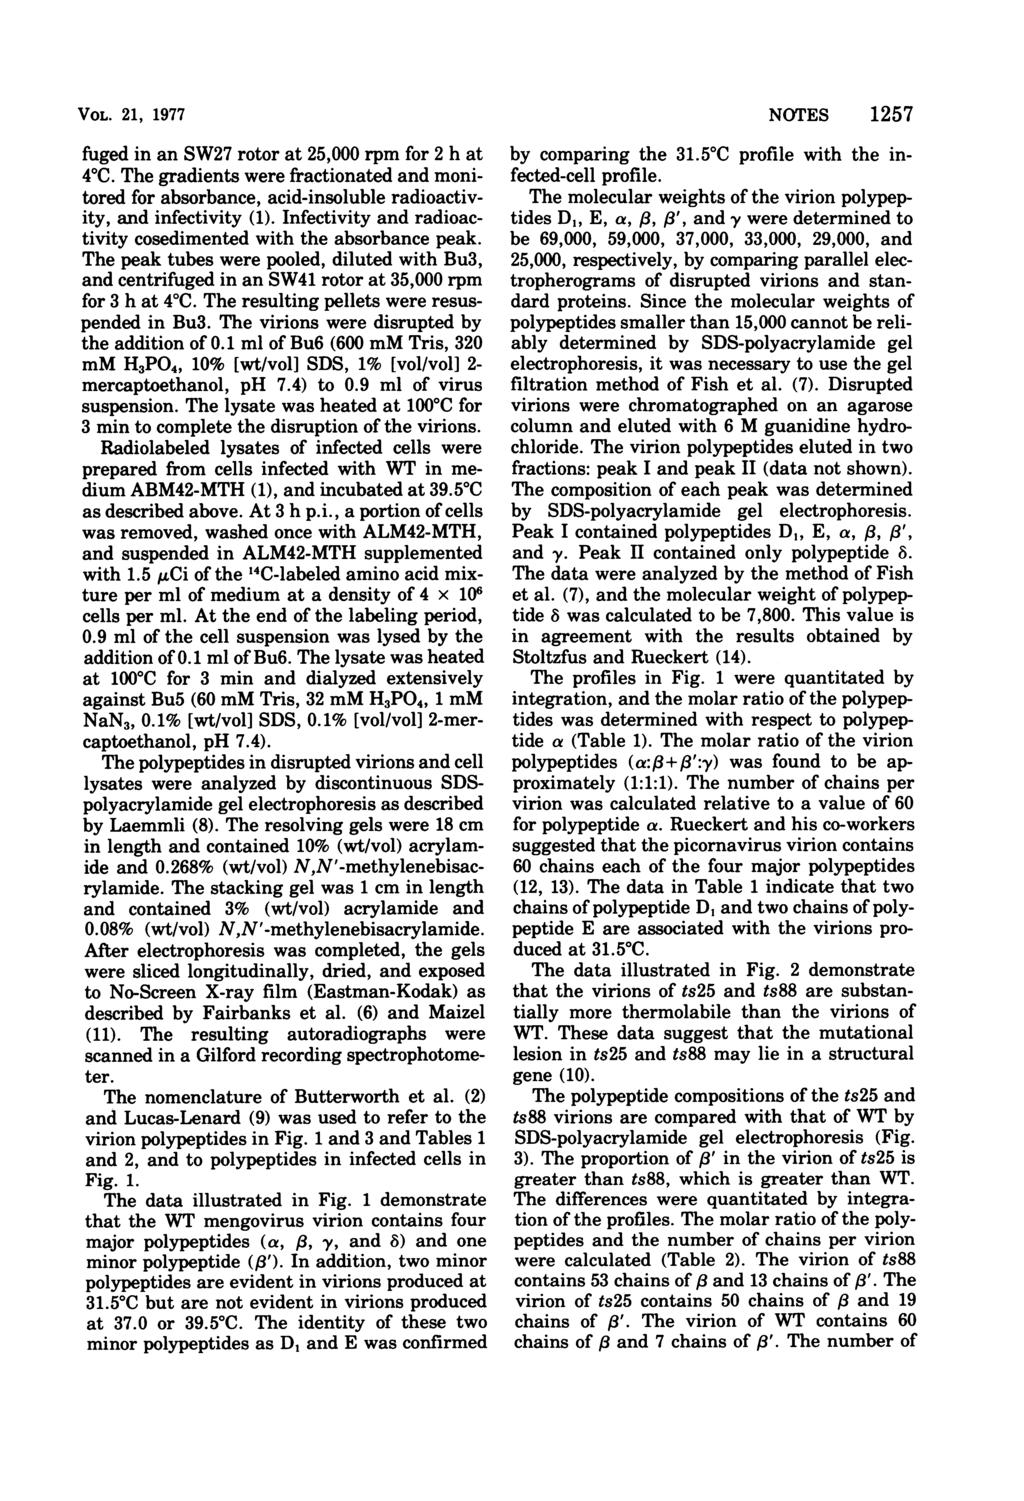 VOL. 21, 1977 fuged in an SW27 rotor at 25, rpm for 2 h at 4VC. The gradients were fractionated and monitored for absorbance, acid-insoluble radioactivity, and infectivity (1).